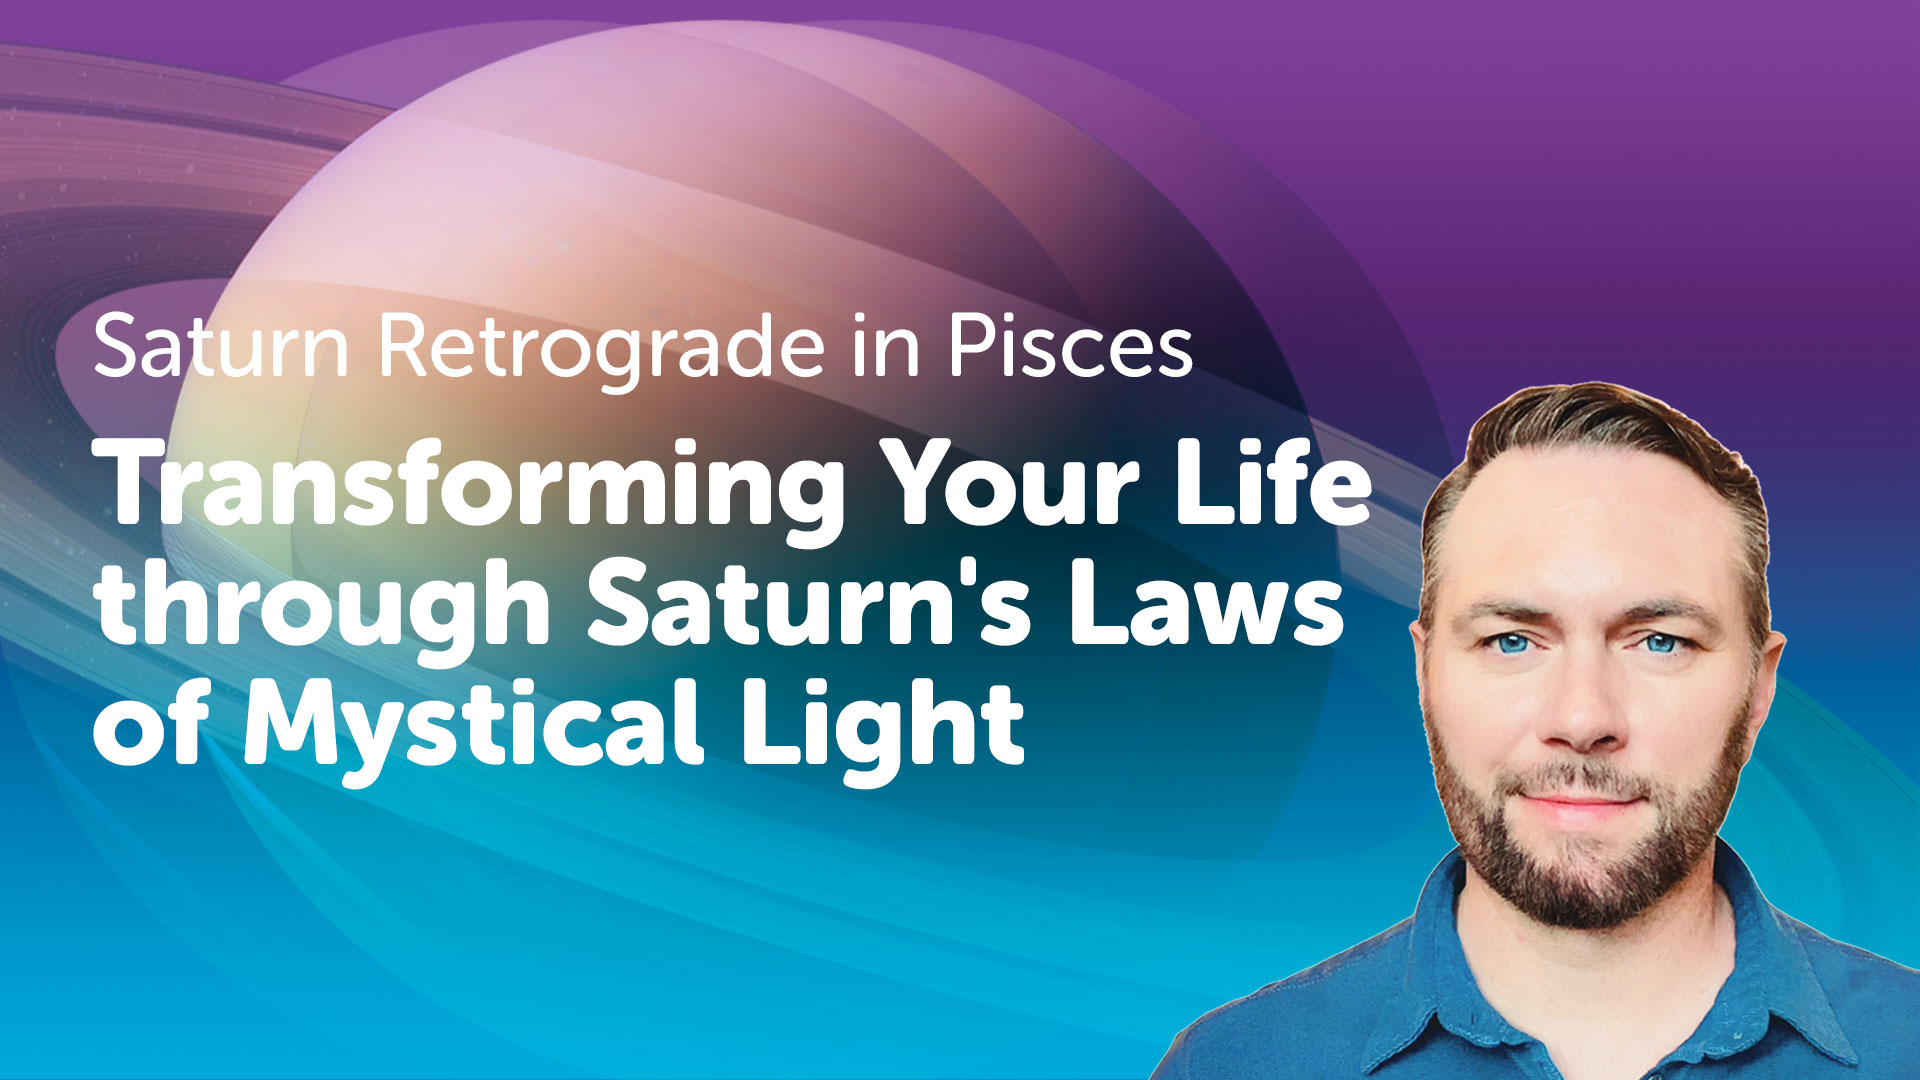 Transforming Your Life through Saturn’s Laws of Mystical Light